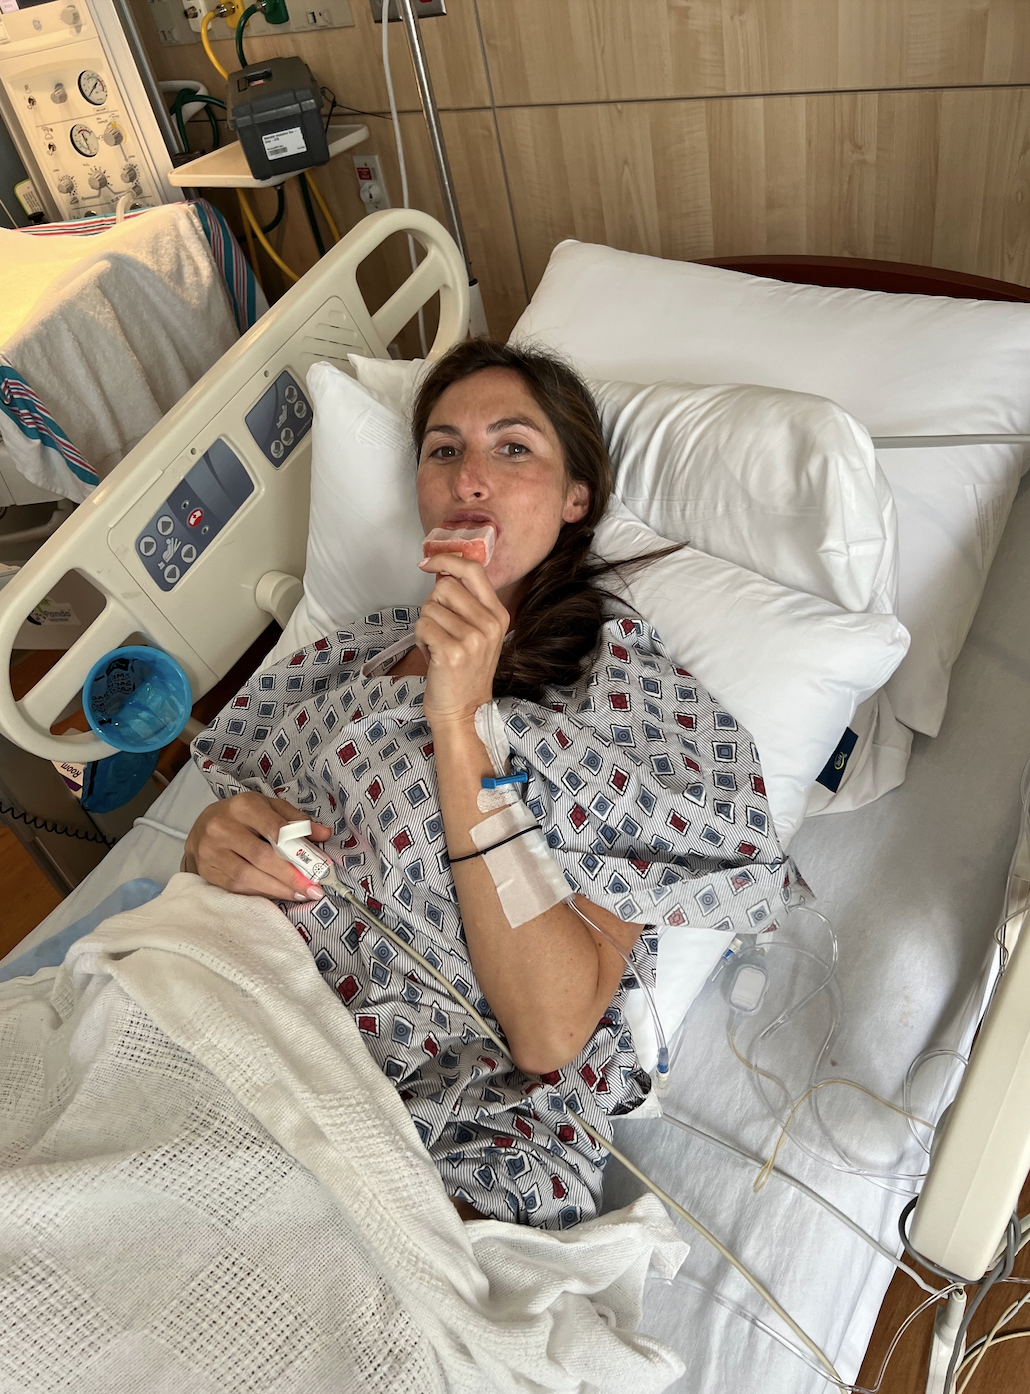 Person in hospital bed with IV, holding something in mouth